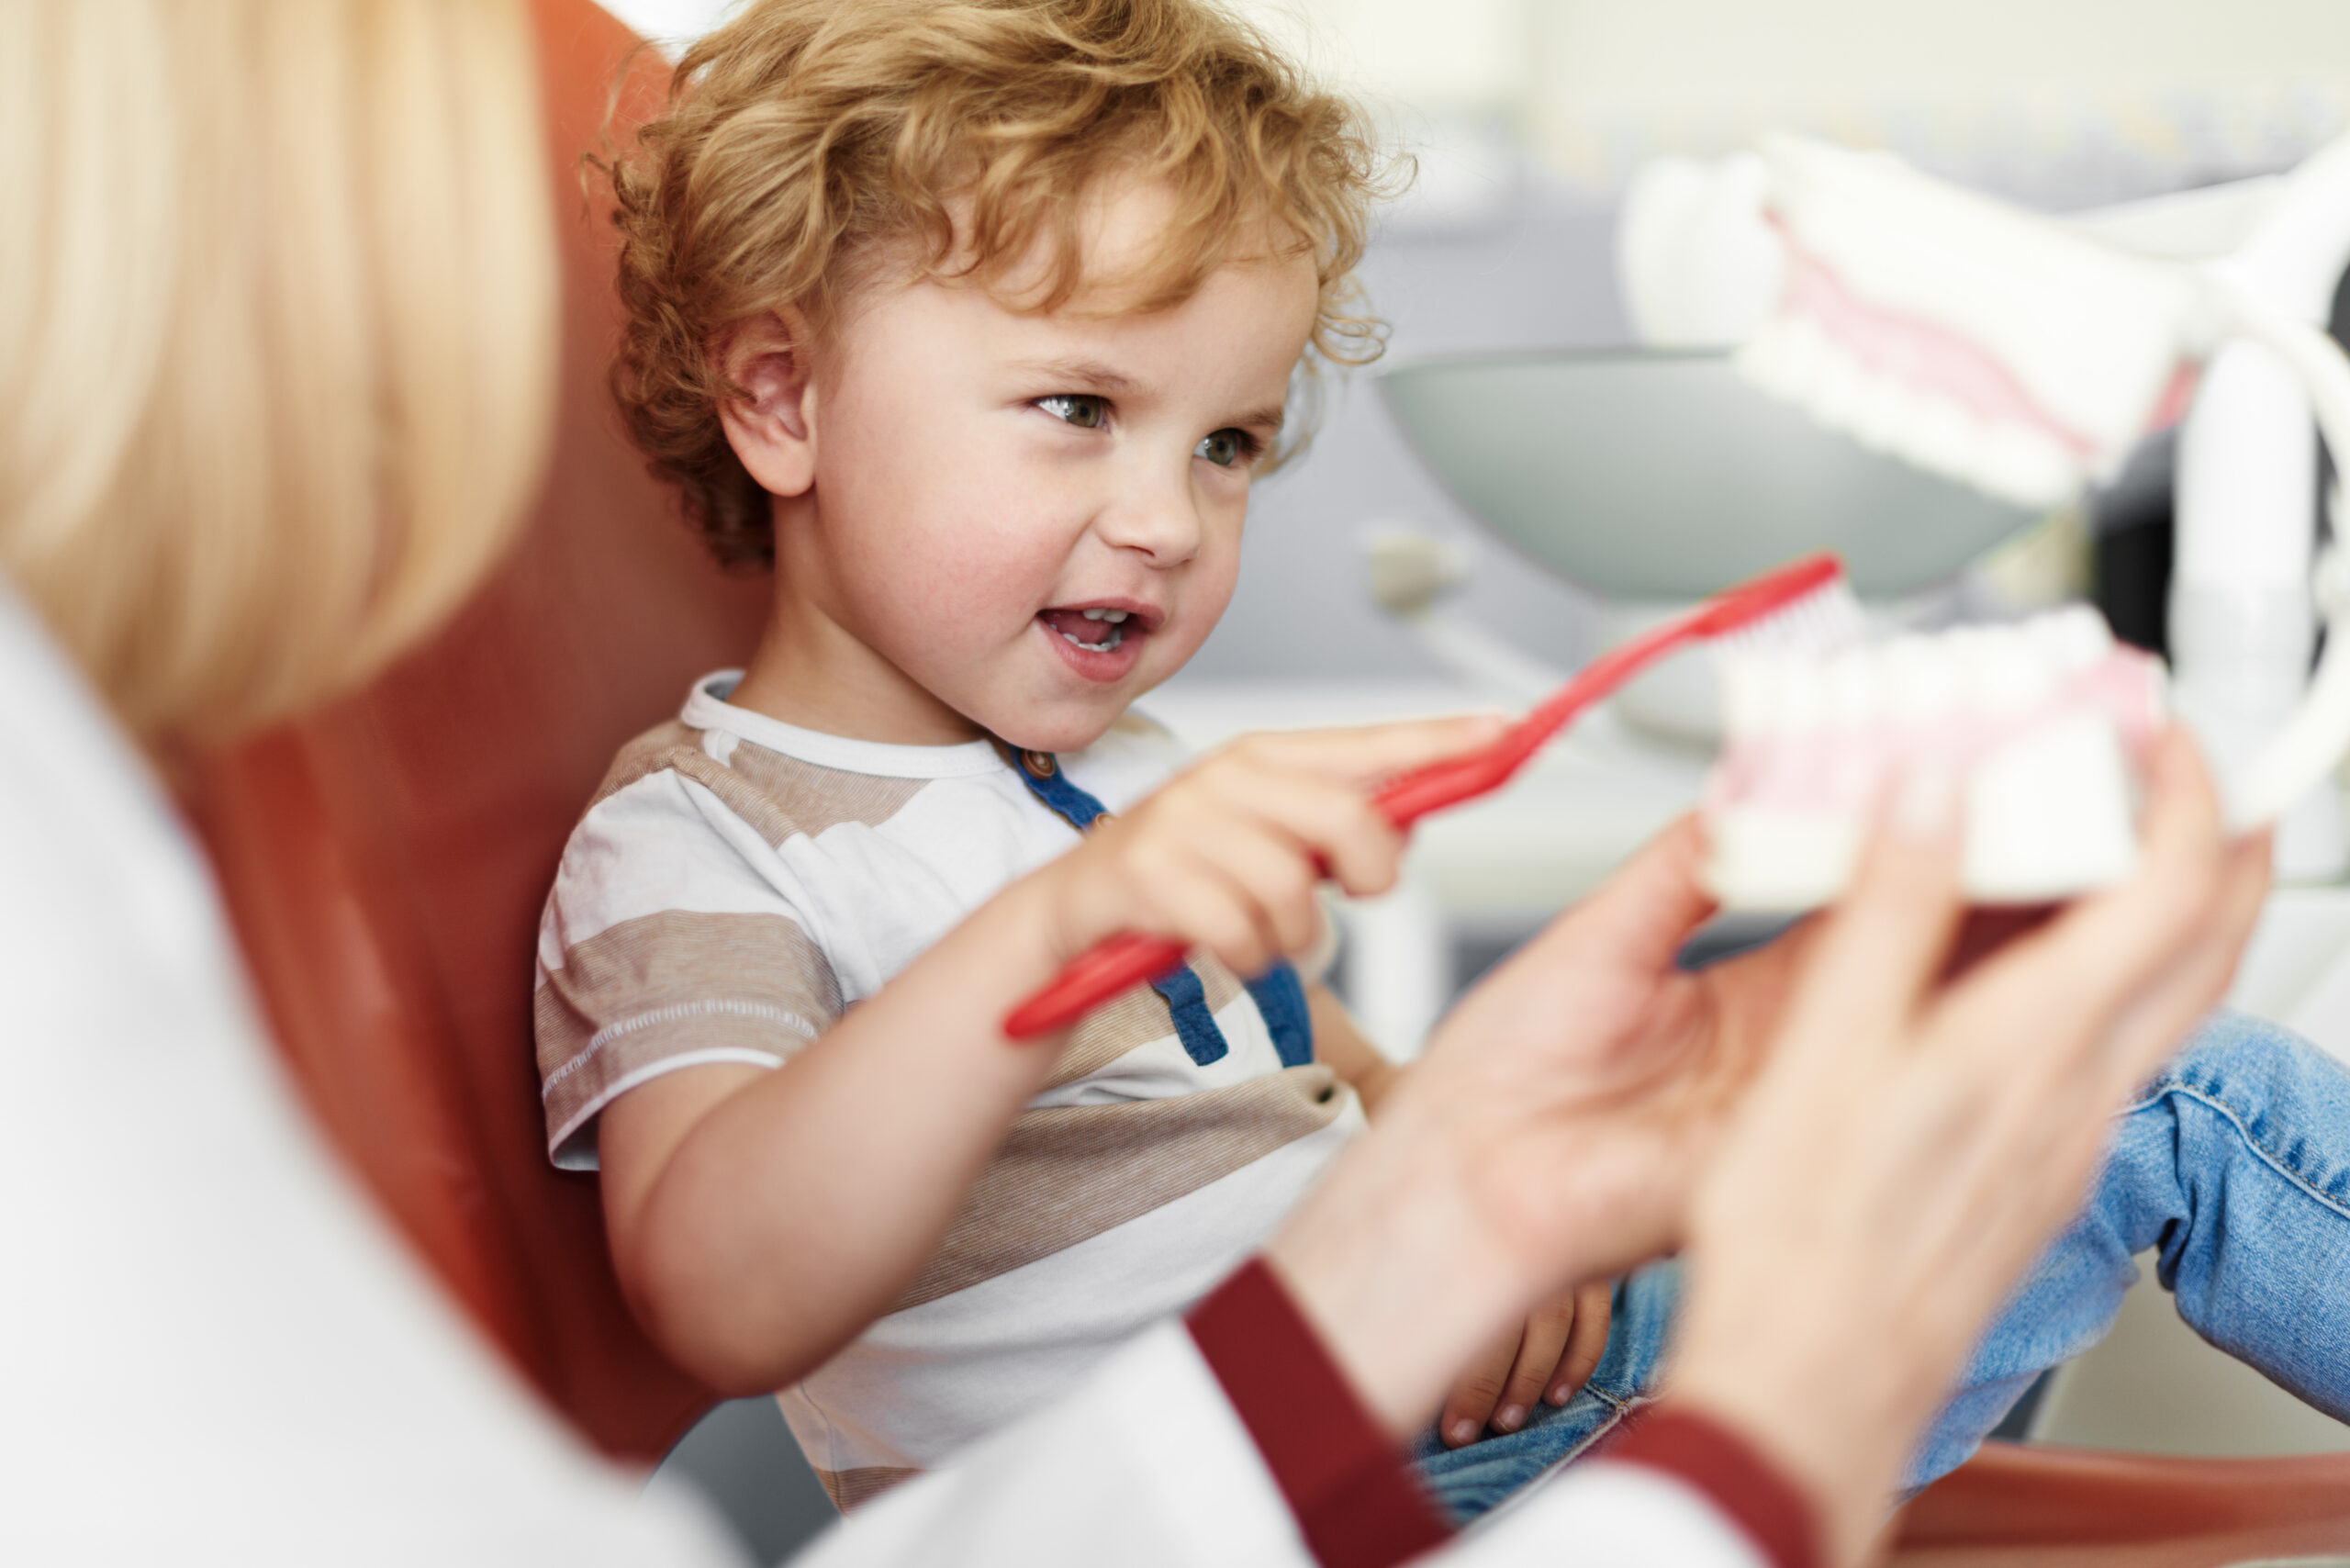 tips to try if your child doesn’t like going to the dentist